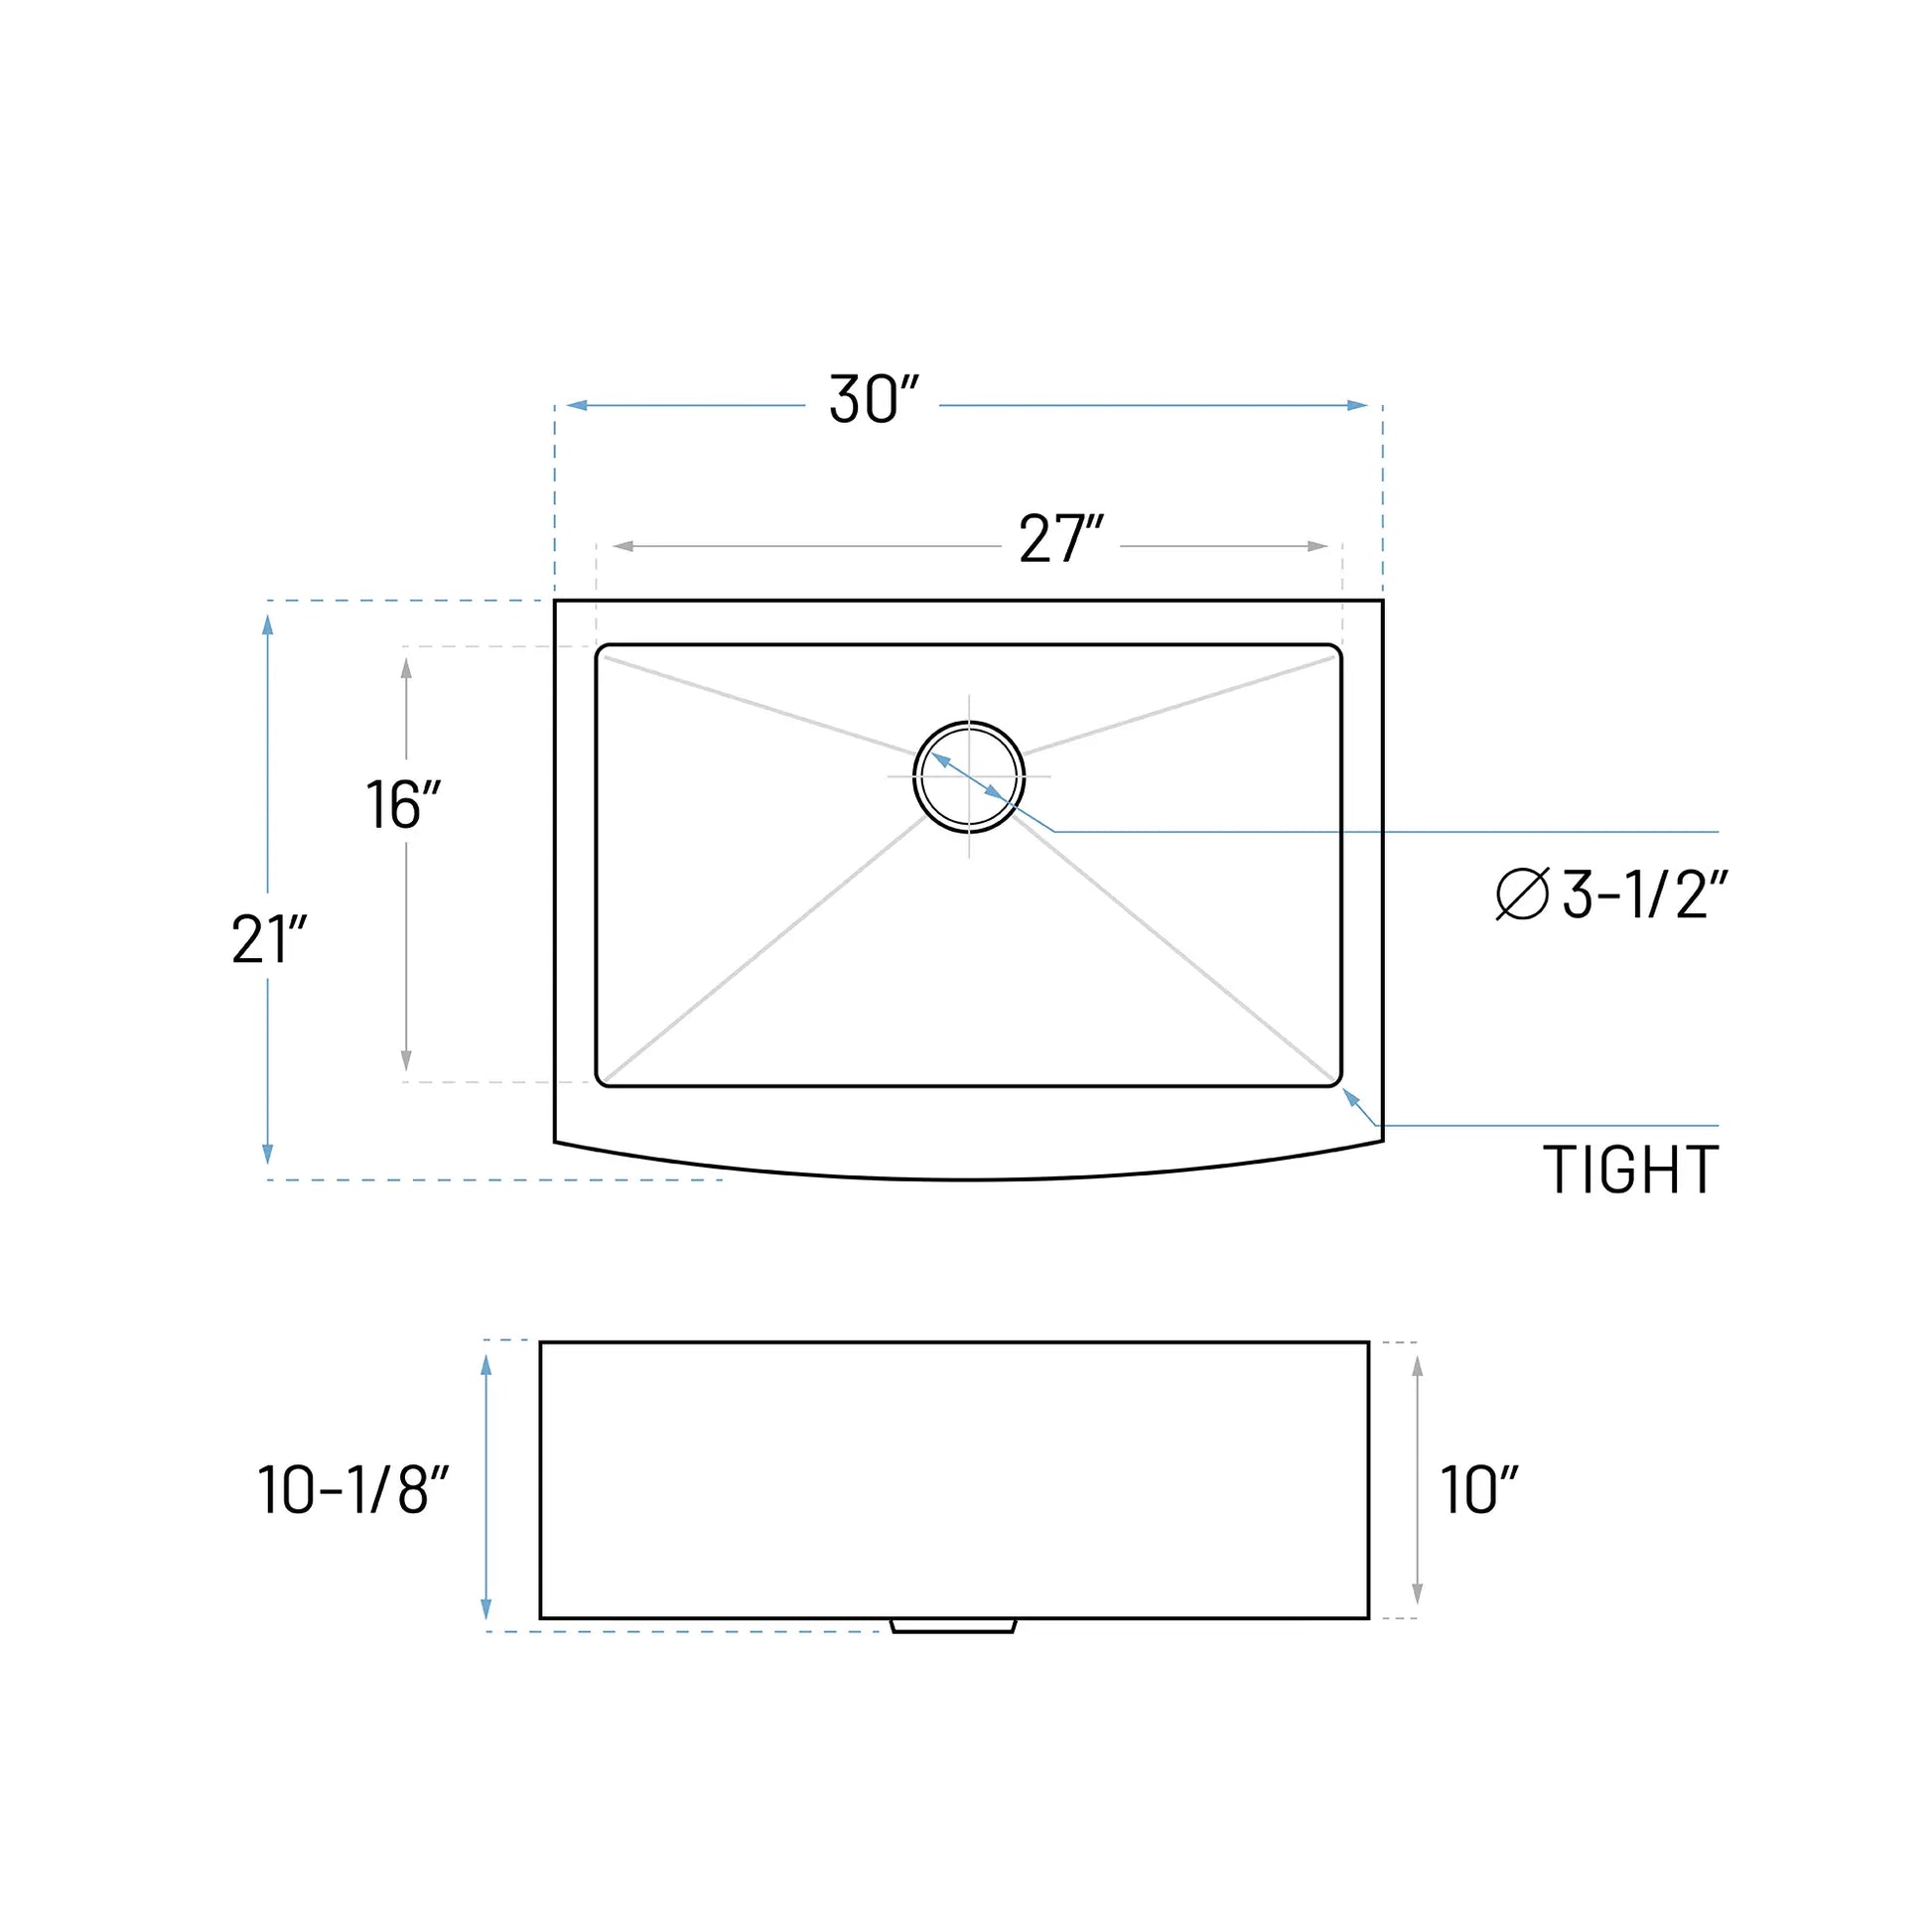 Technical Drawing of Stainless Steel Farmhouse Kitchen Sink